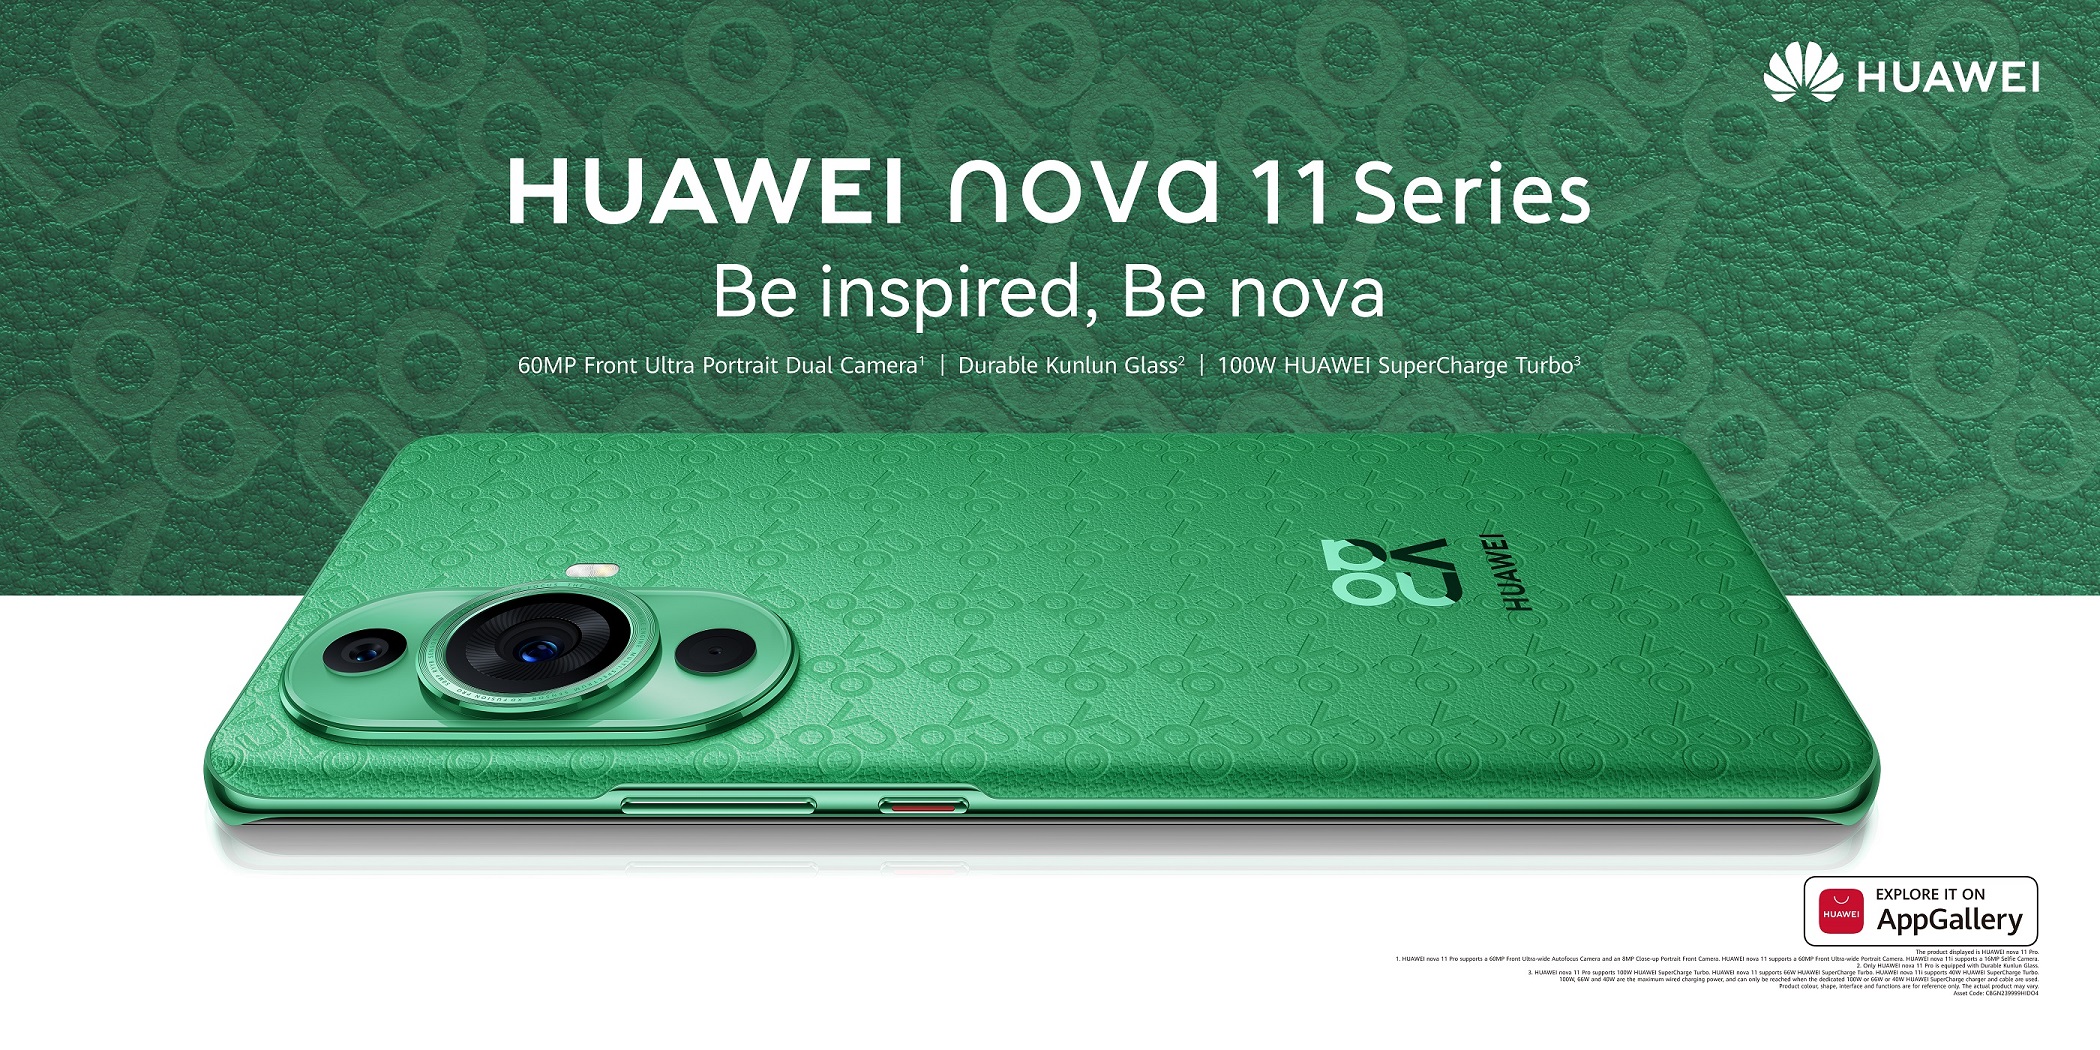 HUAWEI nova 11 Series Launches in the UAE With a Stunning New Design and Powerful Selfie Cameras